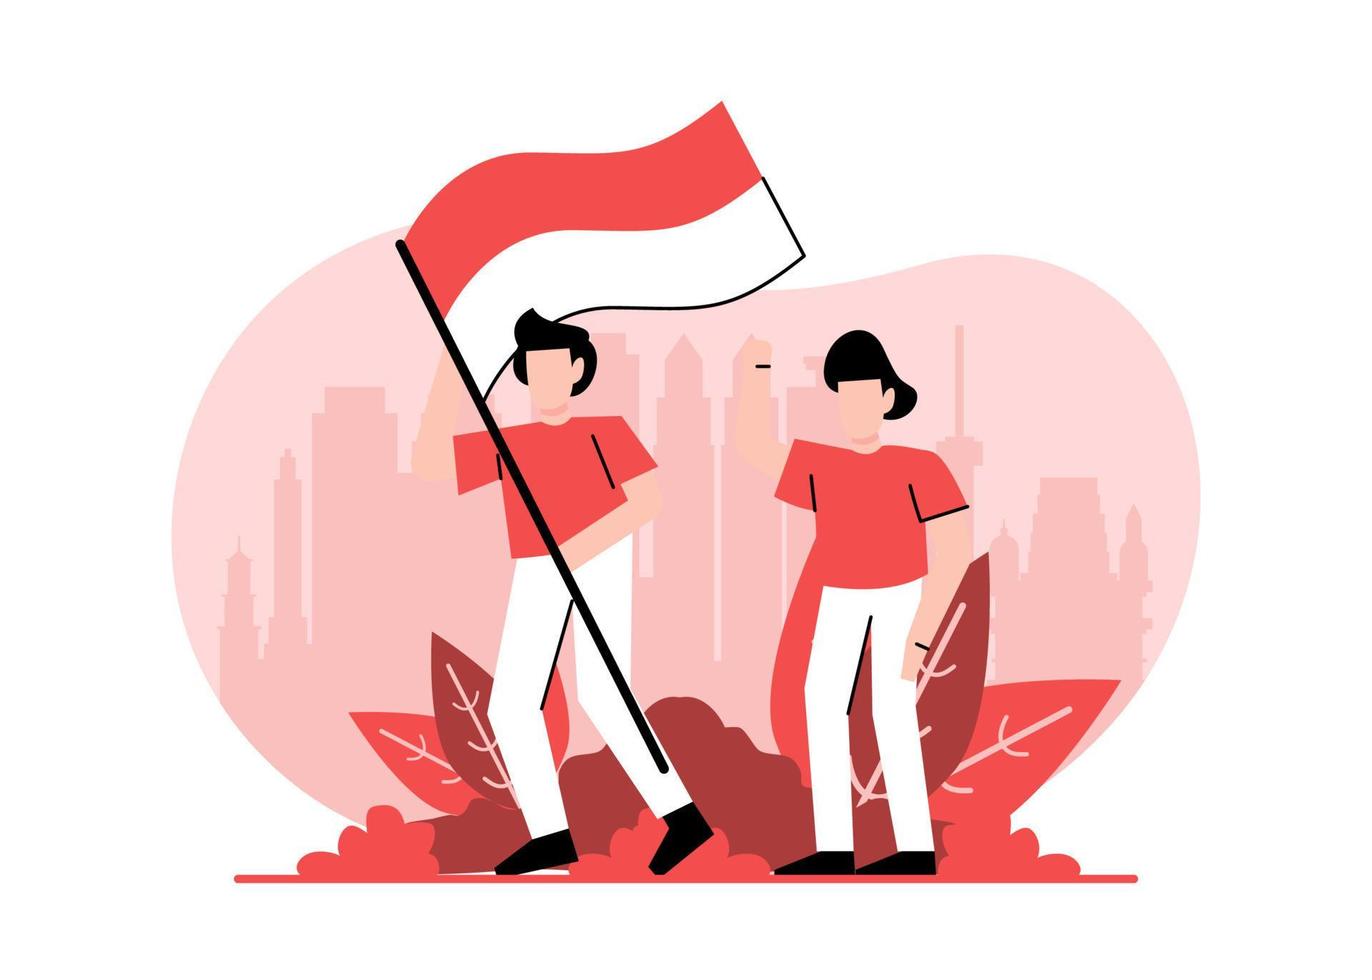 Indonesia Independence Day at 17 August Flat Illustration Vector Isolated. The Youth Ceremony pays respect to the Indonesian flag. Indonesia Flag Raising.